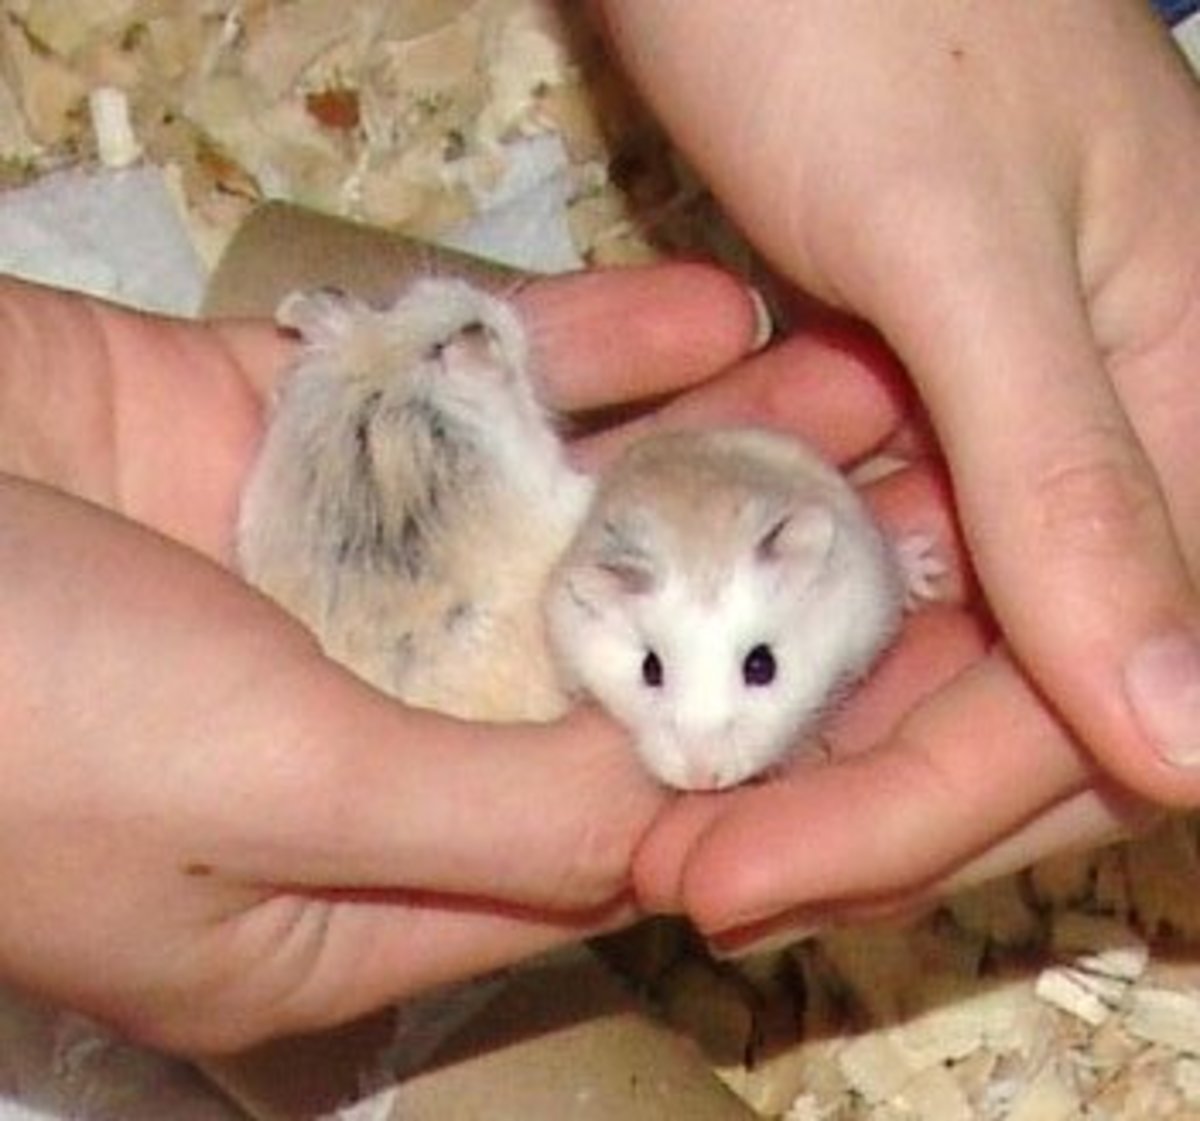 How To Keep A Chinese Dwarf Hamster - Complete Care Guide